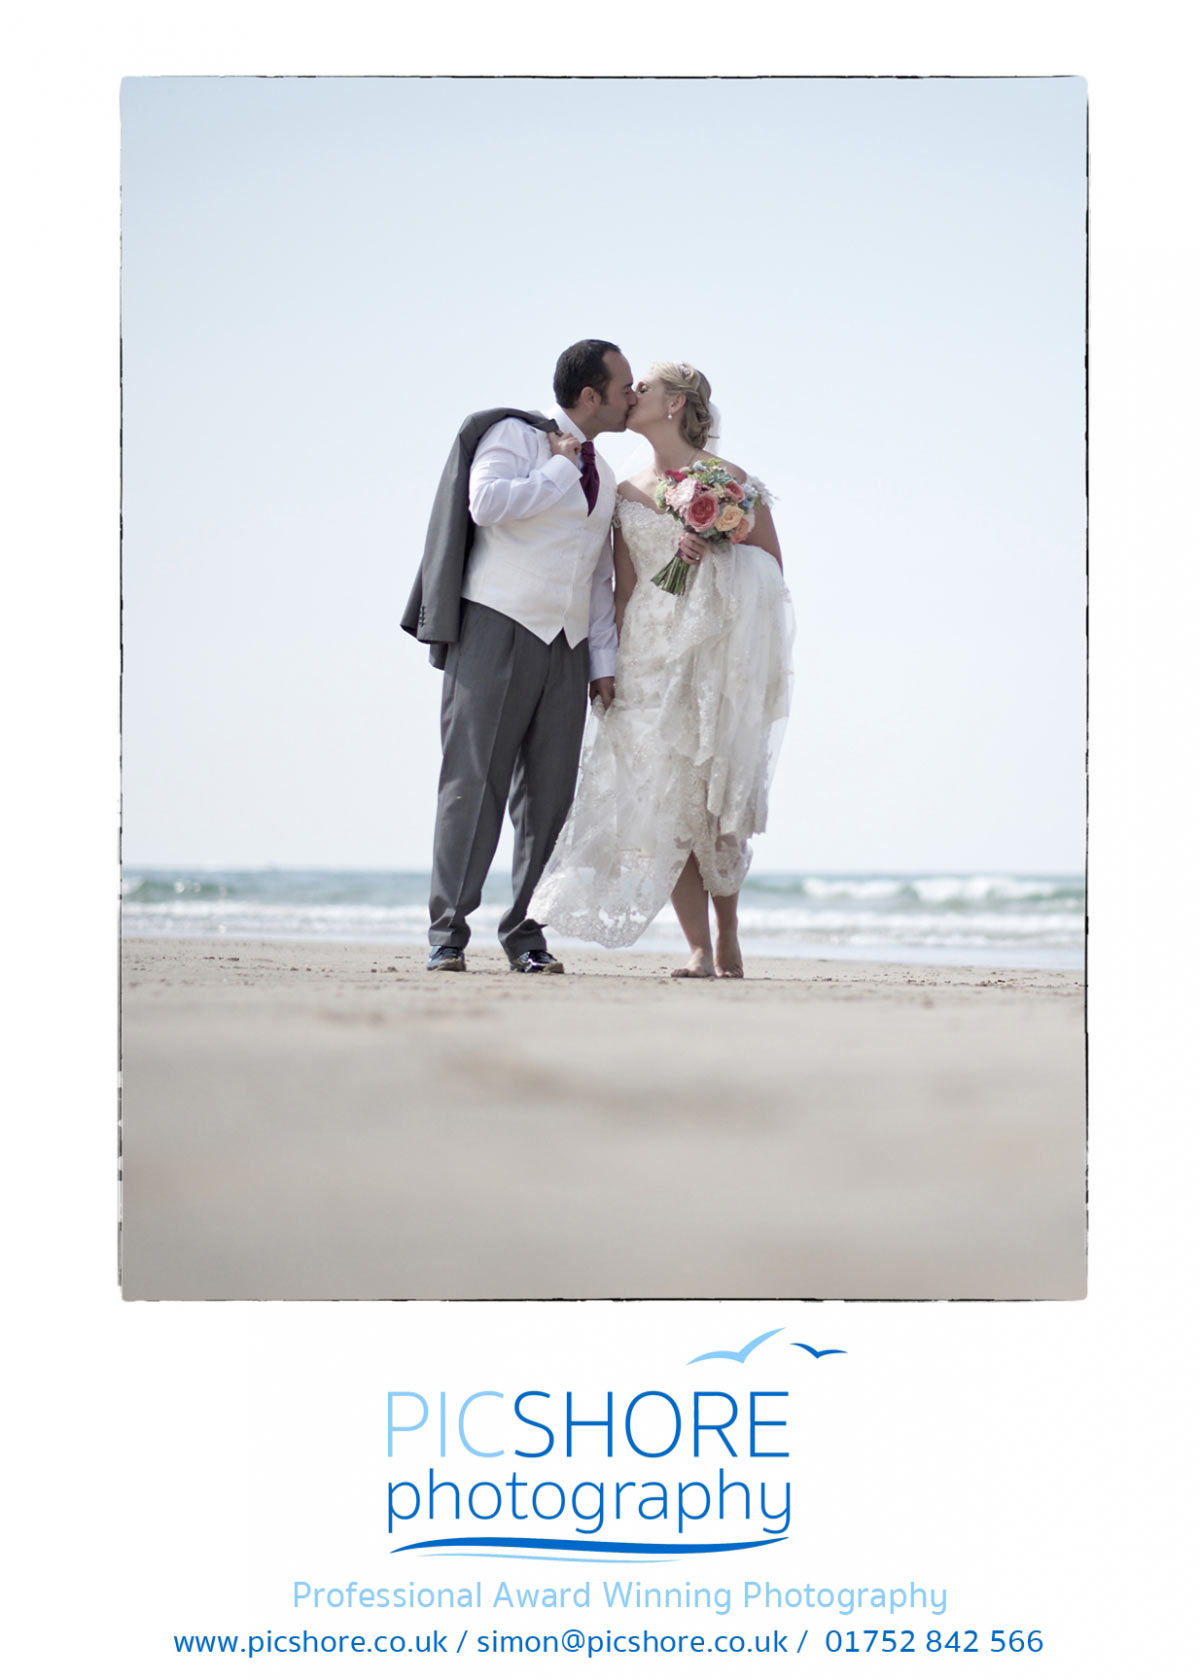 New website and branding for Picshore Photography